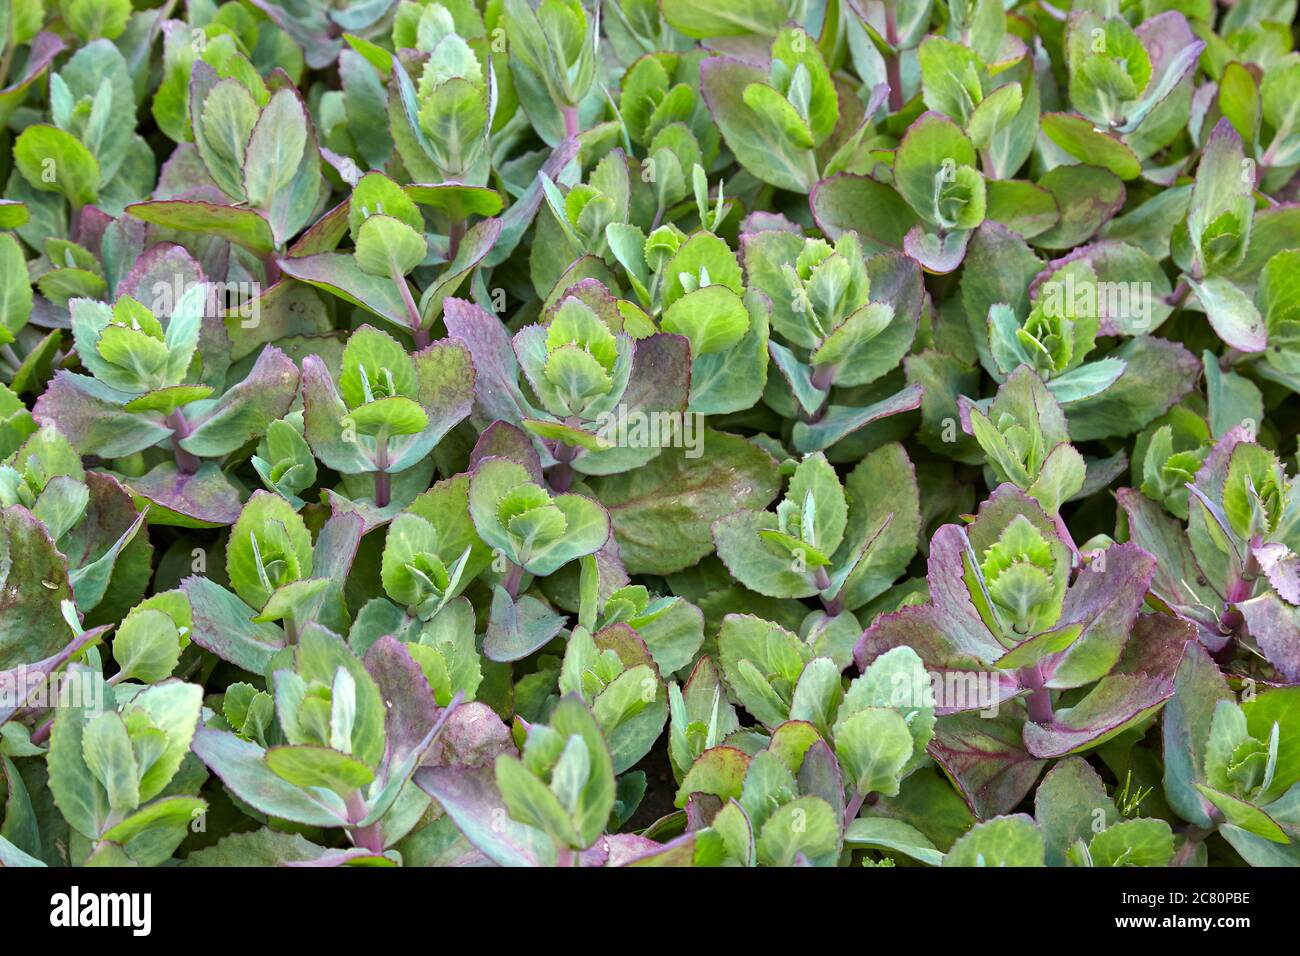 Cluster of the succulent herbaceous perennial plant Brooklime otherwise known as the European speedwell Stock Photo